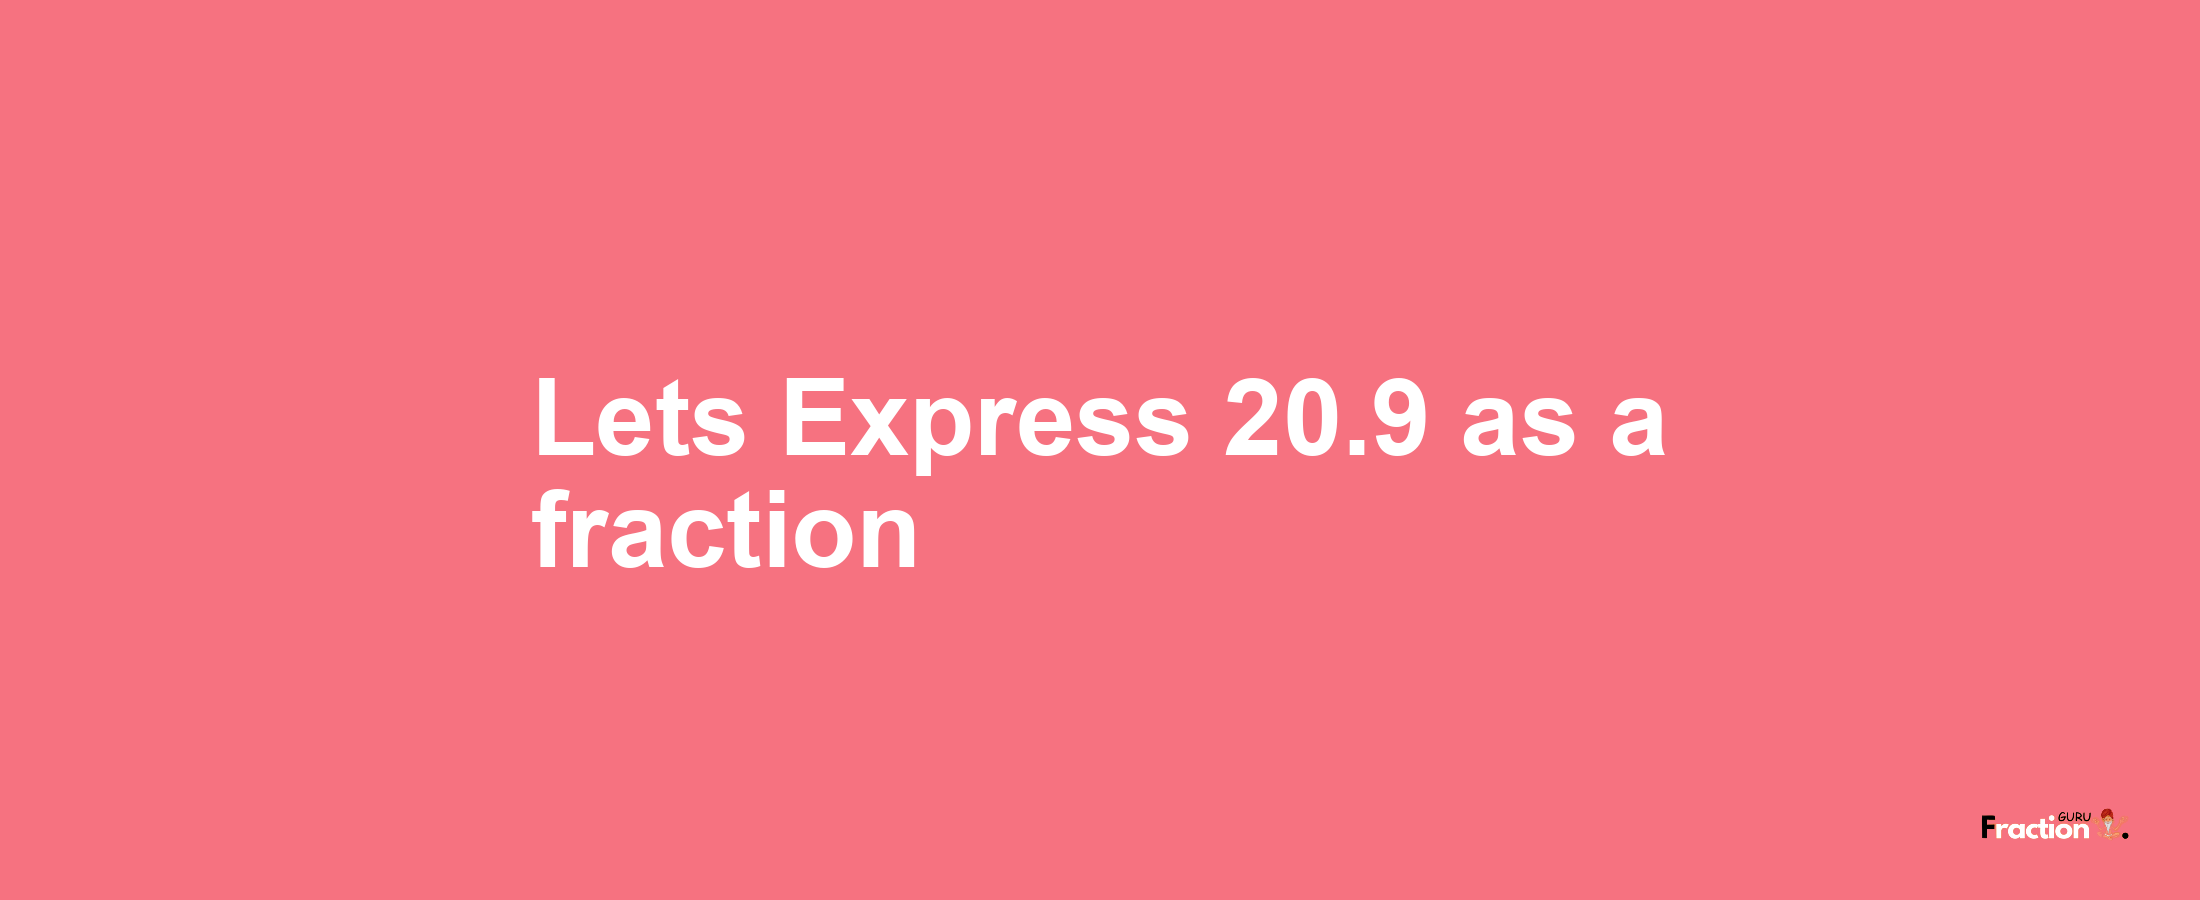 Lets Express 20.9 as afraction